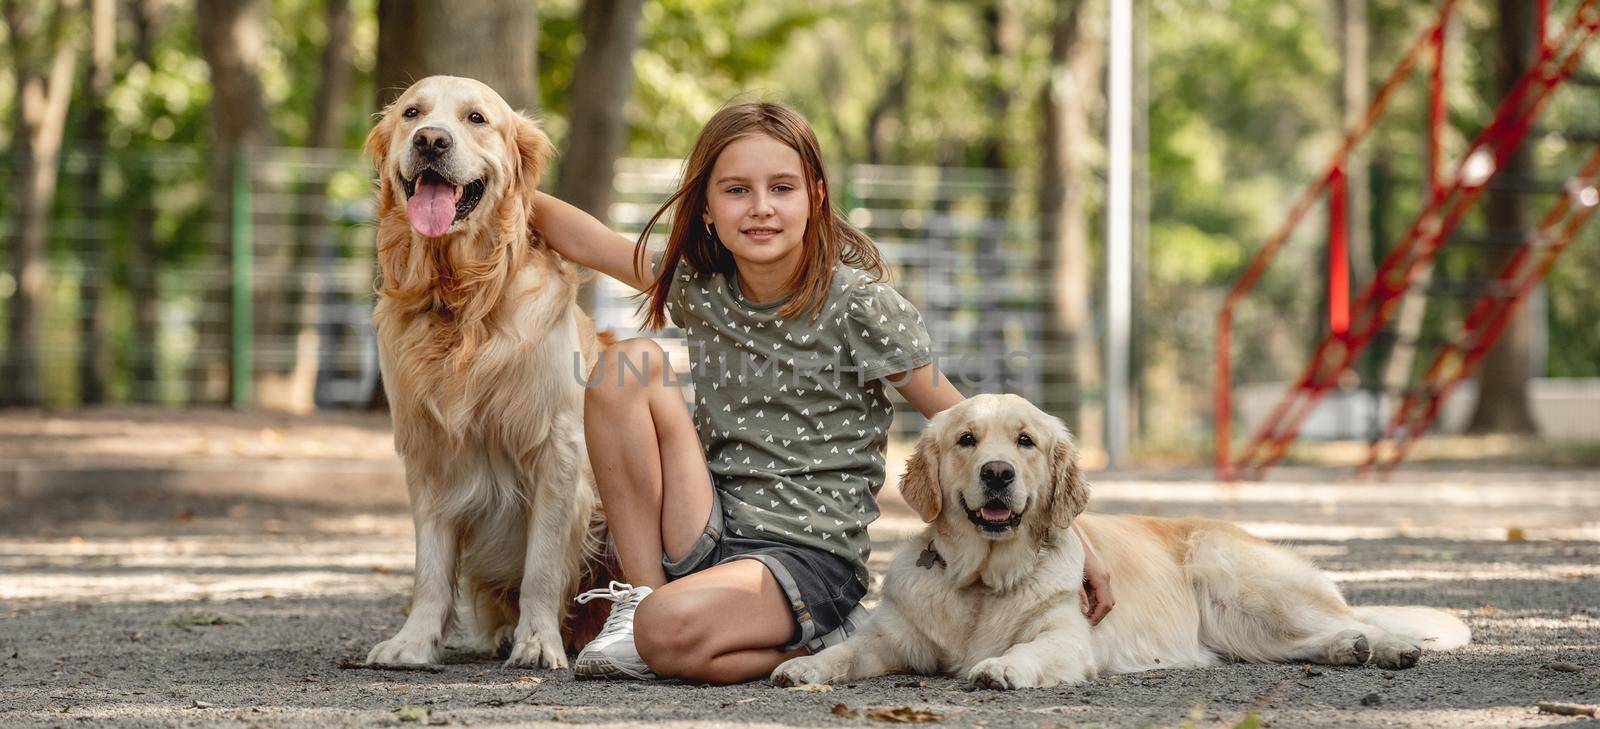 Preteen girl with golden retriever dogs sitting in the park. Cute child with doggy pets posing outdoors